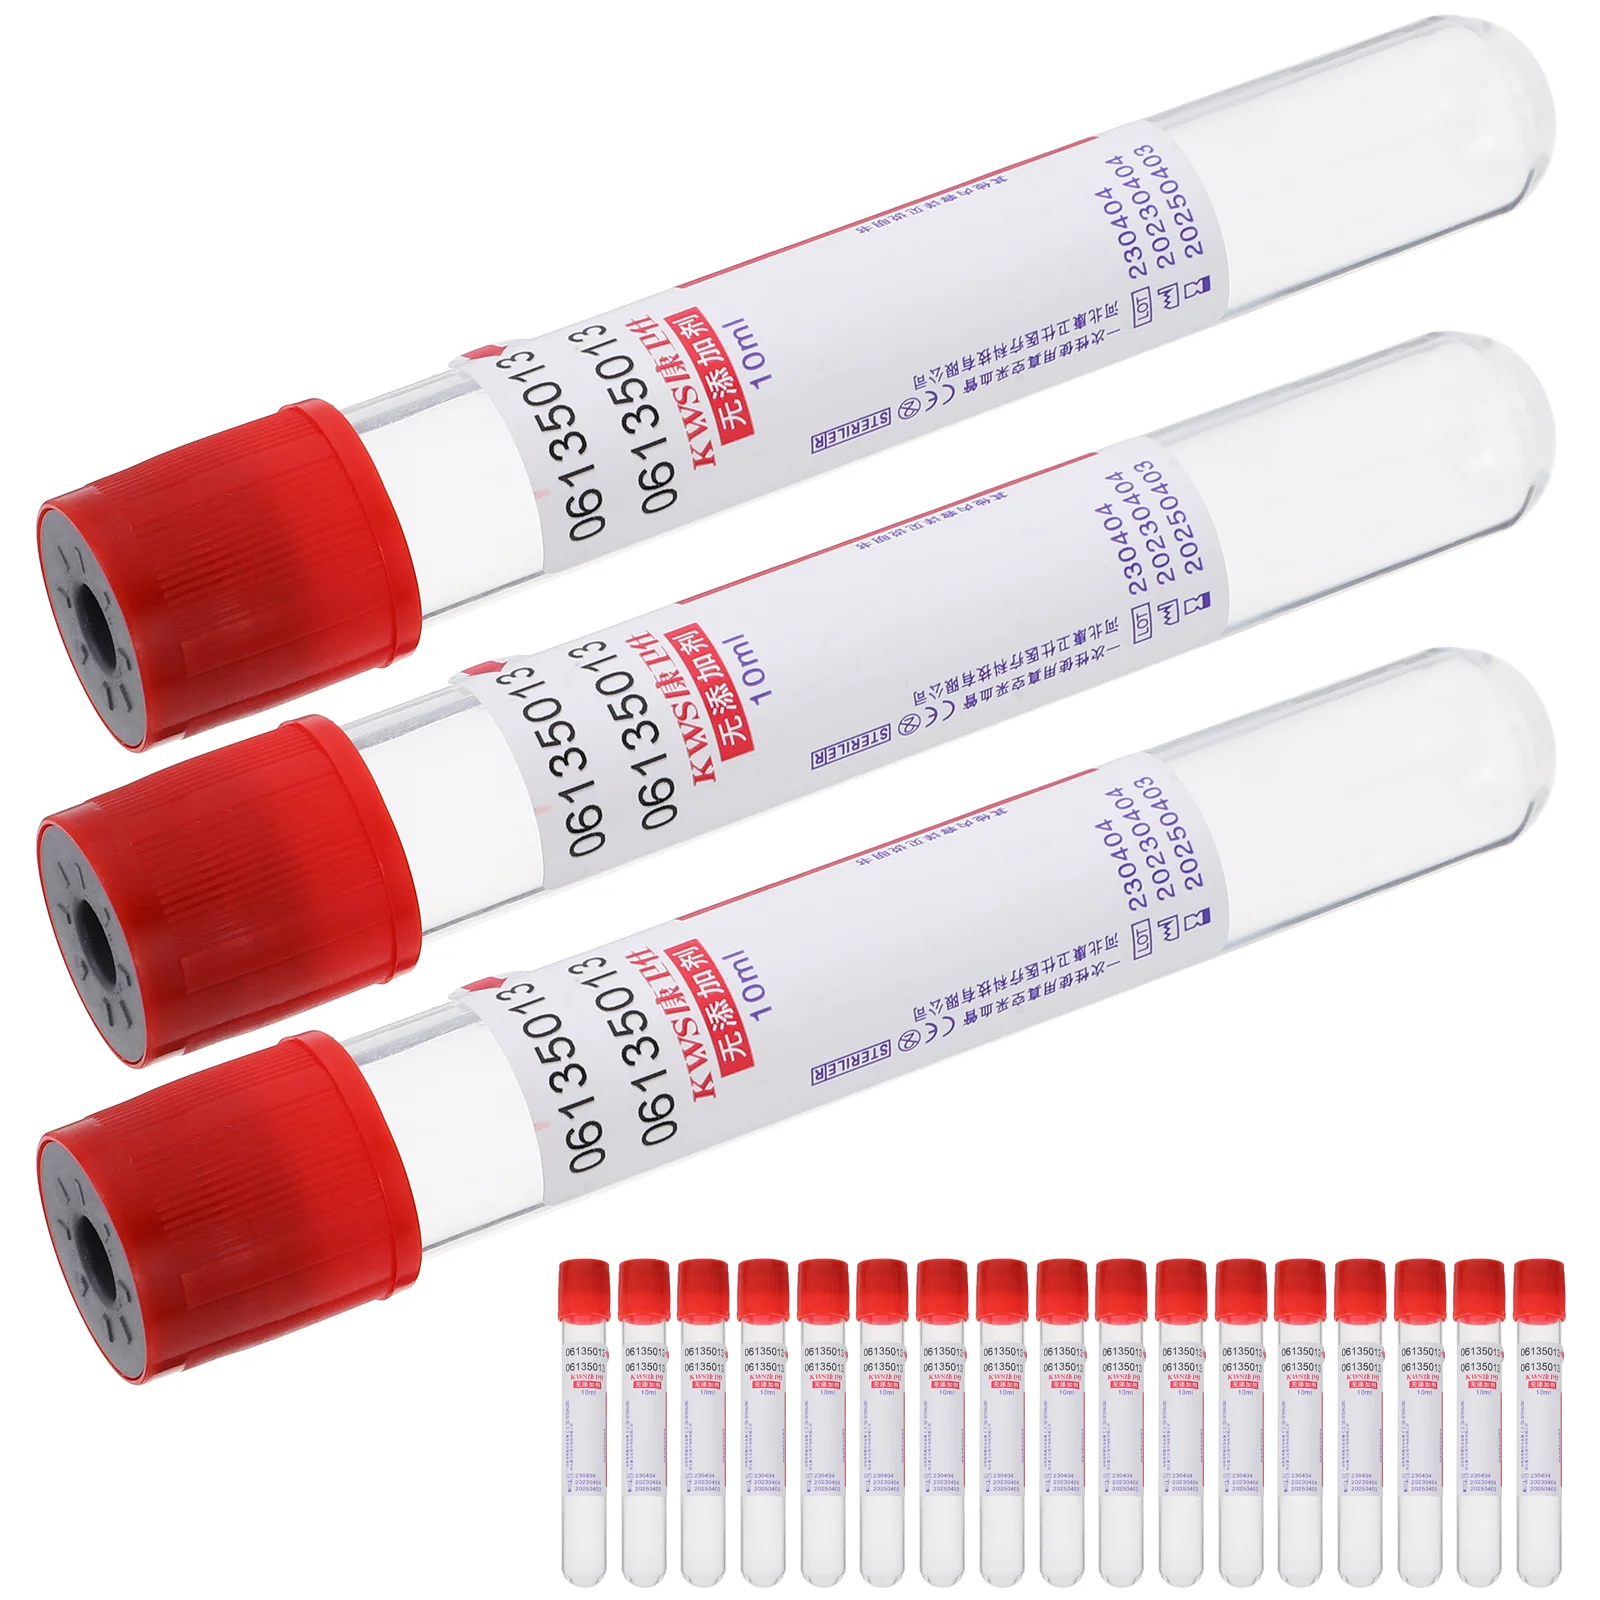 

100 Pcs 10ml Blood Collection Tube Glass Tubes Negative Pressure Disposable Experiment Test with Lids Vacuum Collector